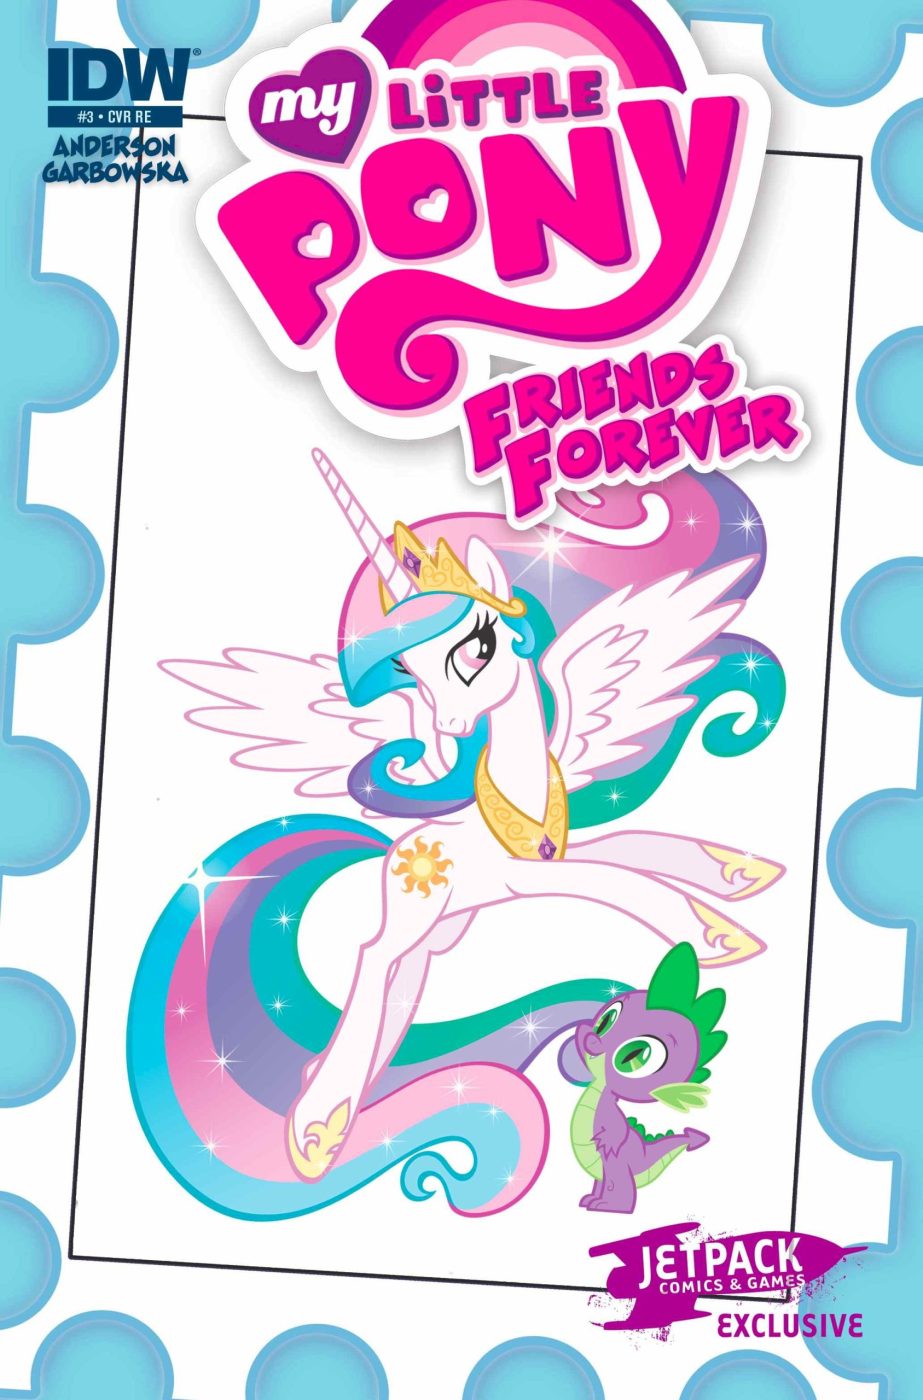 MY LITTLE PONY FRIENDS FOREVER #3 (Jetpack Comics B micro print edition )